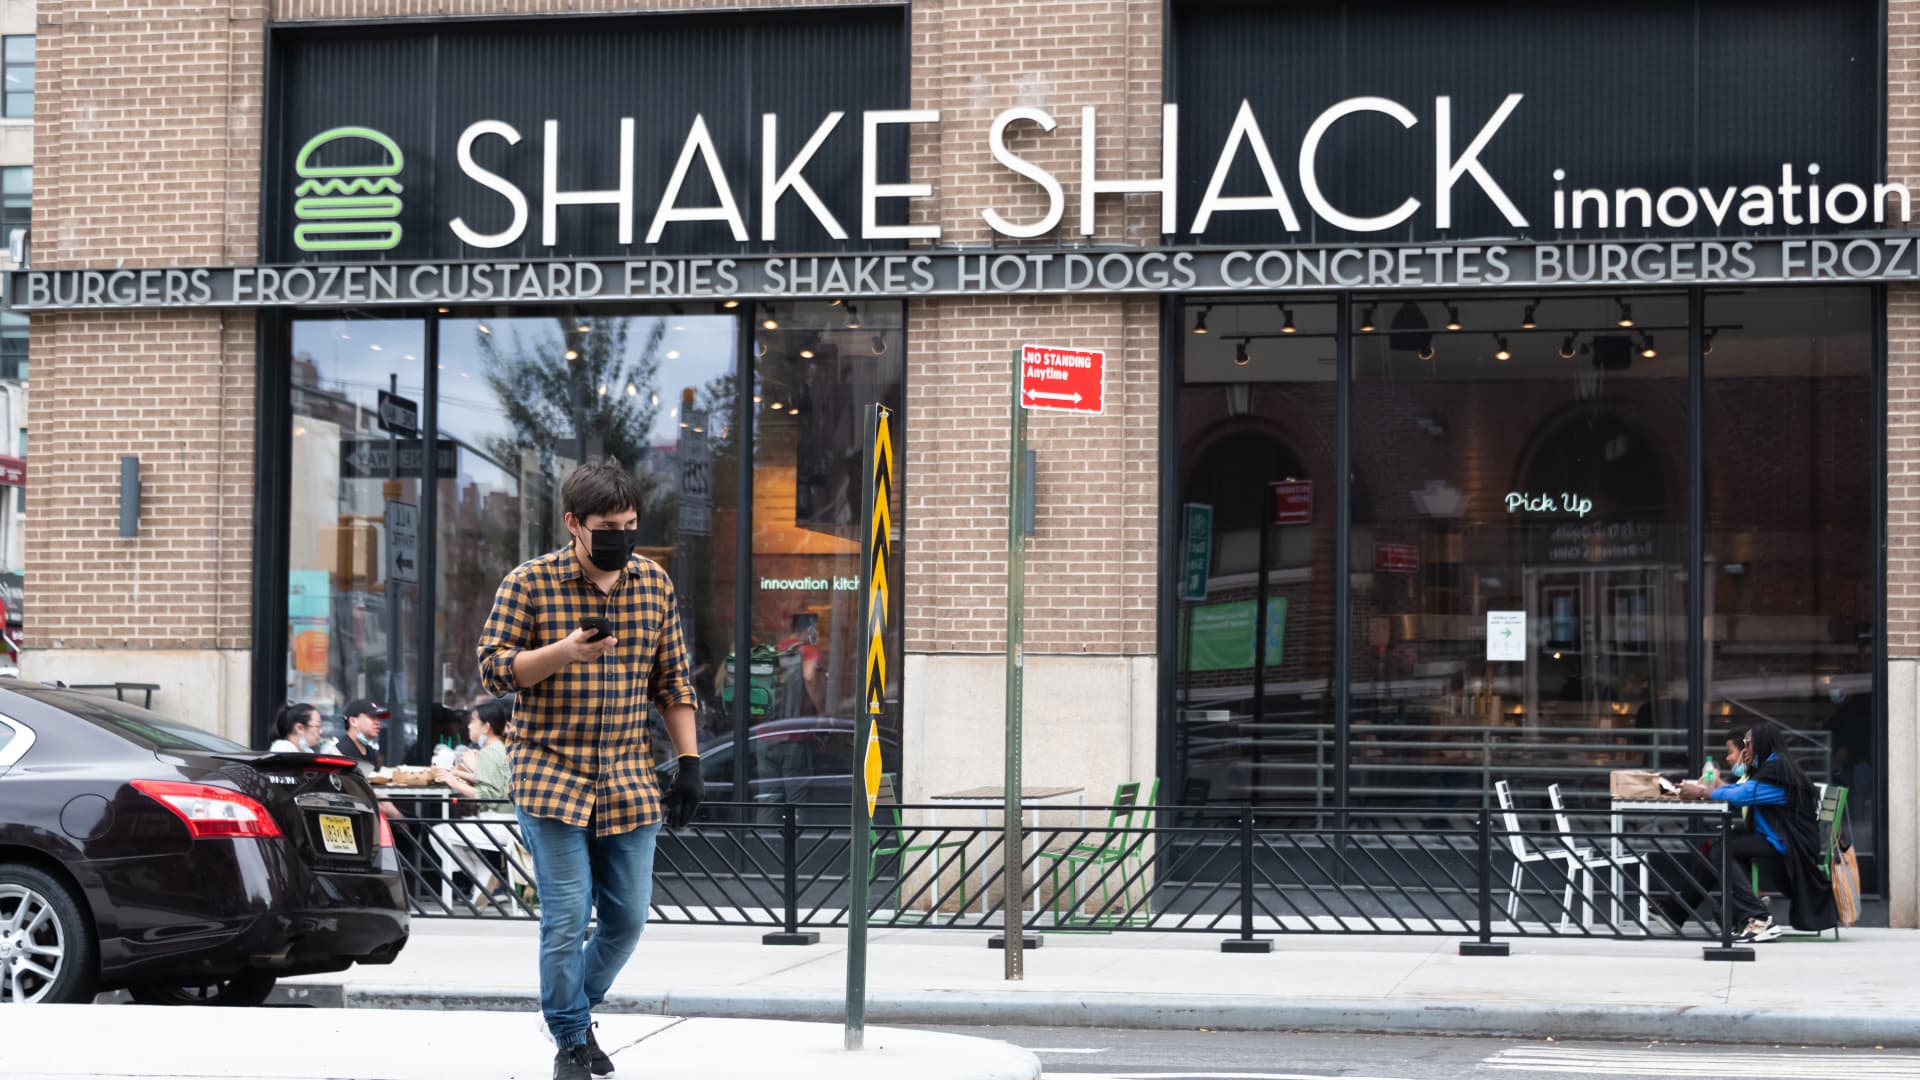 A person wears a face mask outside Shake Shack Innovation Kitchen in Greenwich Village as the city continues Phase 4 of re-opening following restrictions imposed to slow the spread of coronavirus on September 27, 2020 in New York City.